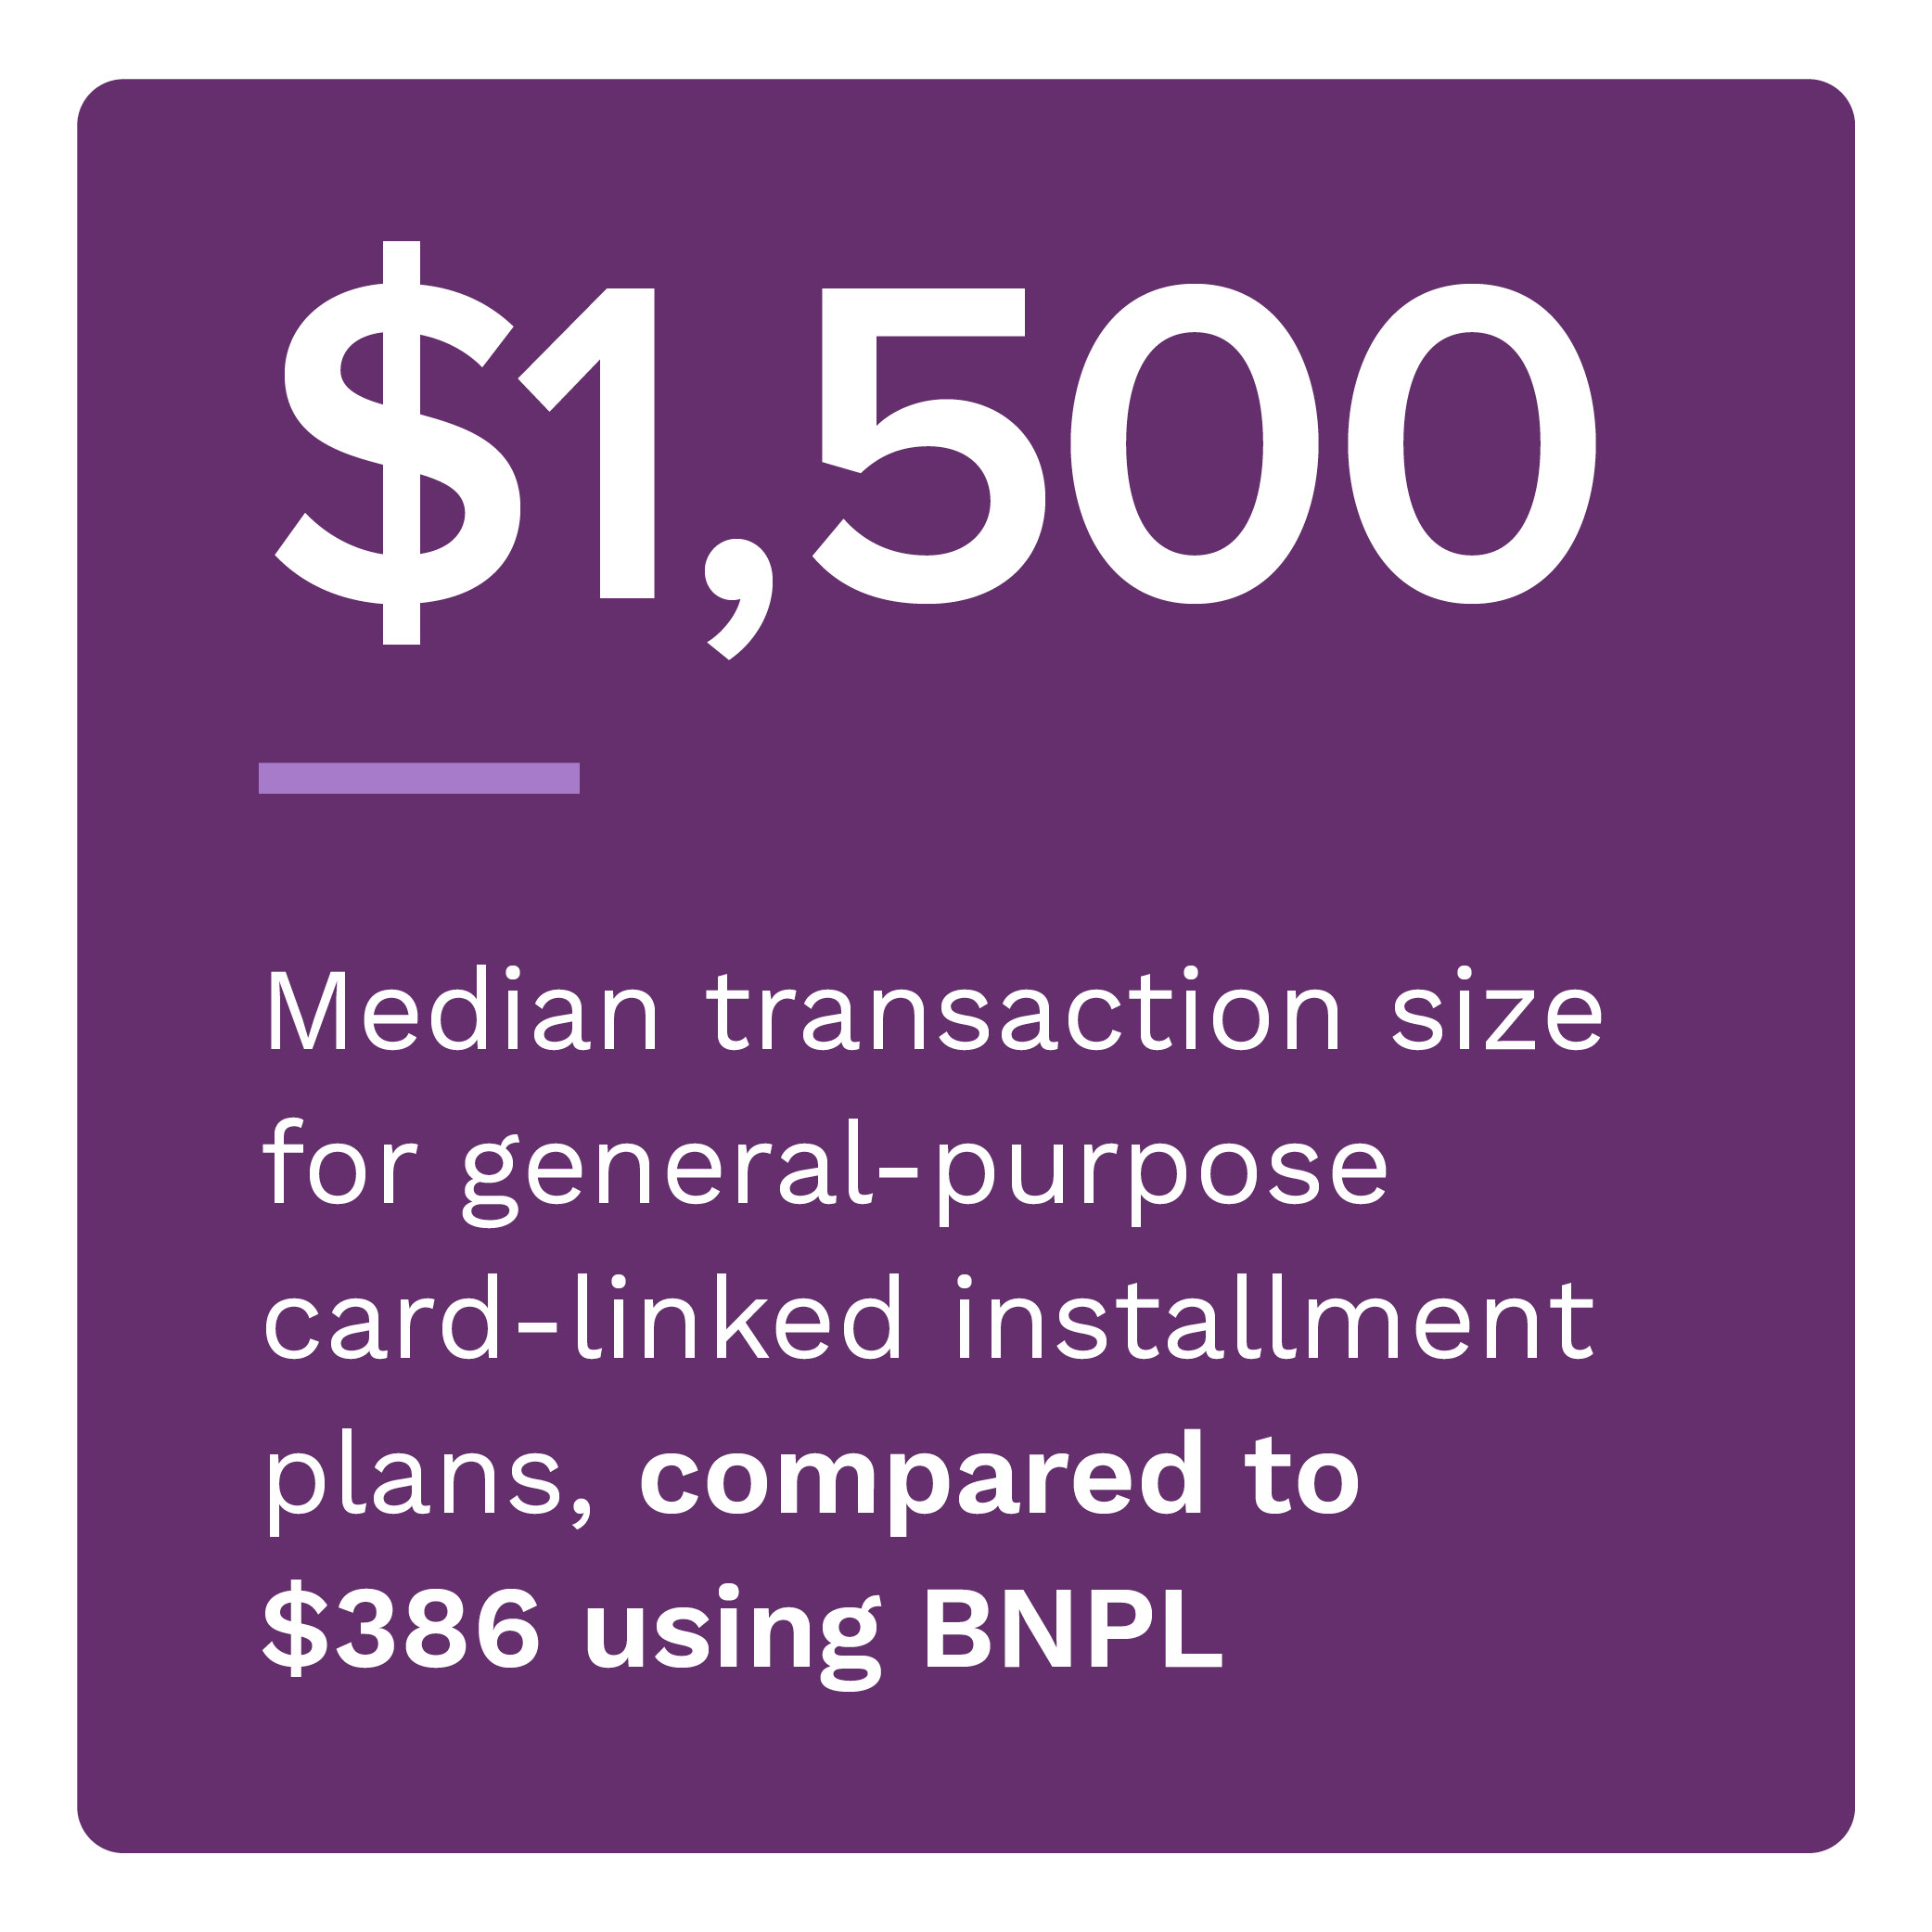 $1,500: Median transaction amount for general-purpose card-linked installment plans, compared to $386 using BNPL